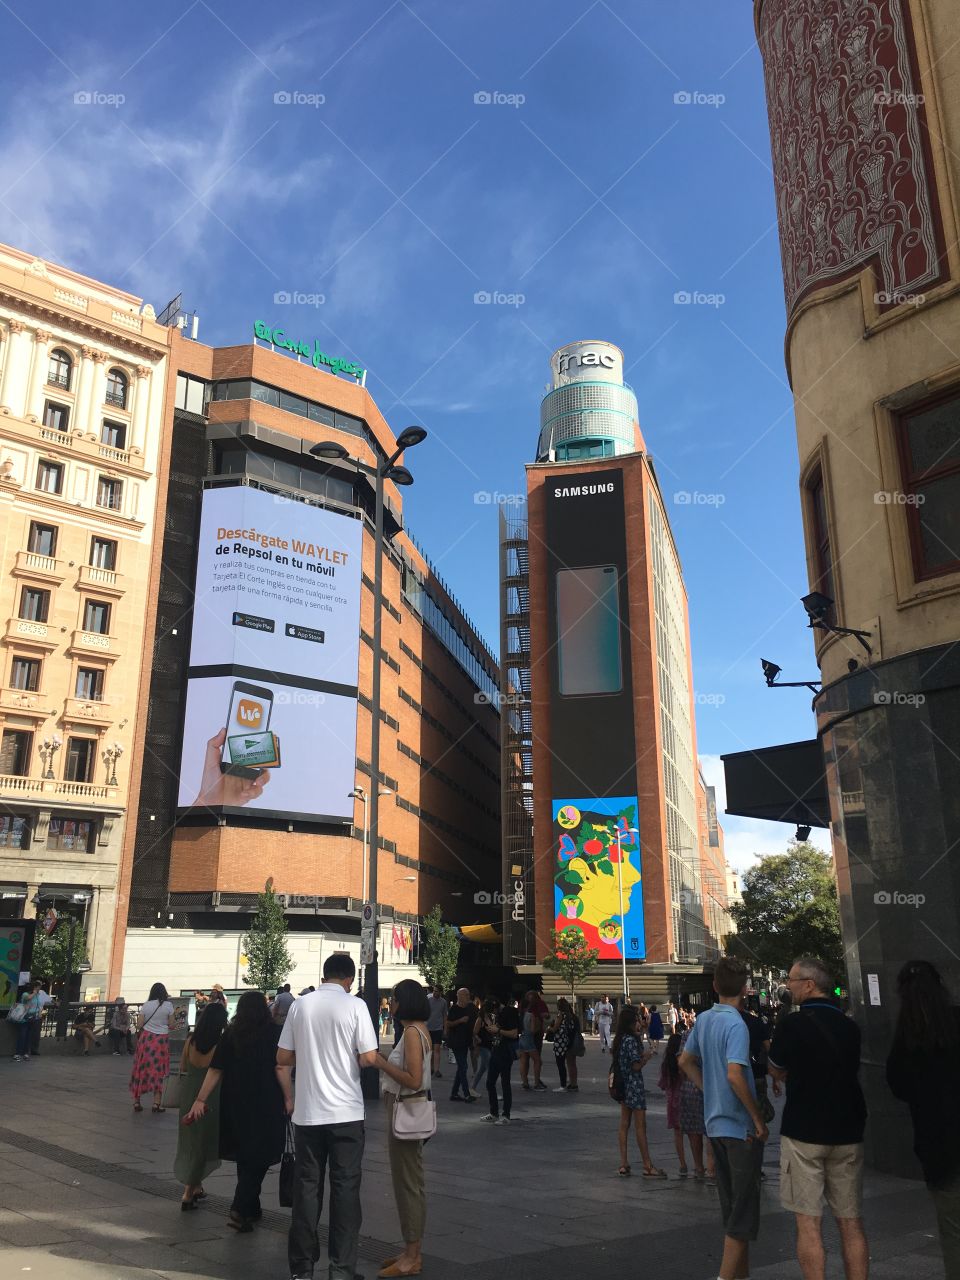 Callao, Madrid is where the city comes to life. The 42nd Street of Madrid. Tall building and active city life. 